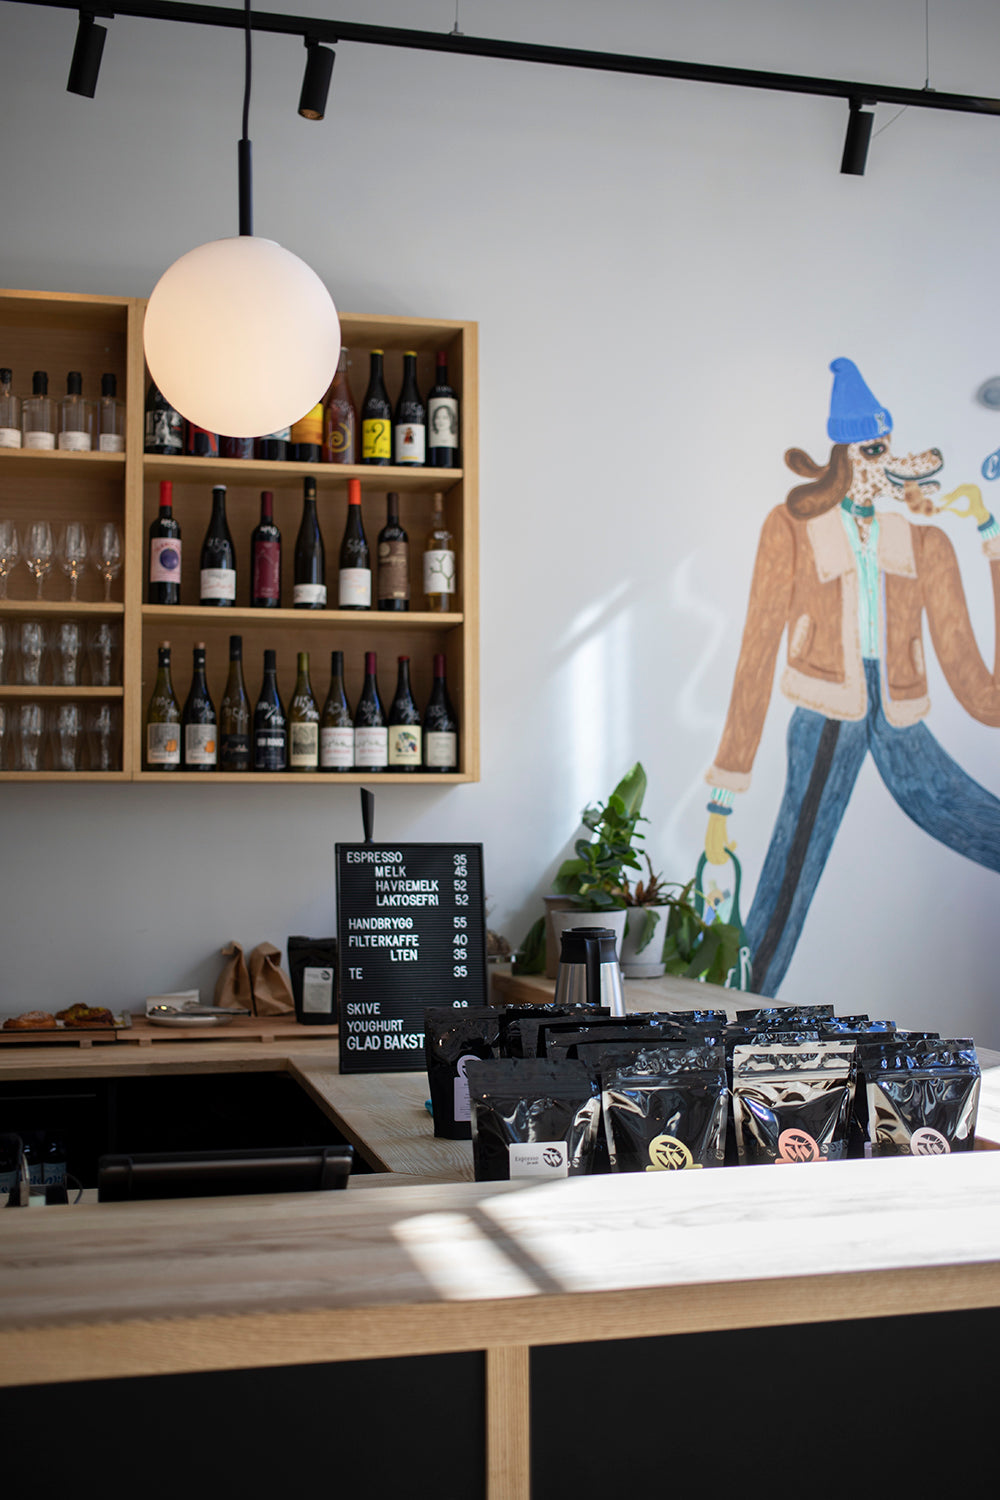 Dapper's Nordre gate coffee bar: mural painted on the wall by artist Charlie Roberts, bags of coffee for sale from Tim Wendelboe. Bright and sunny with nice light and lots of space. 